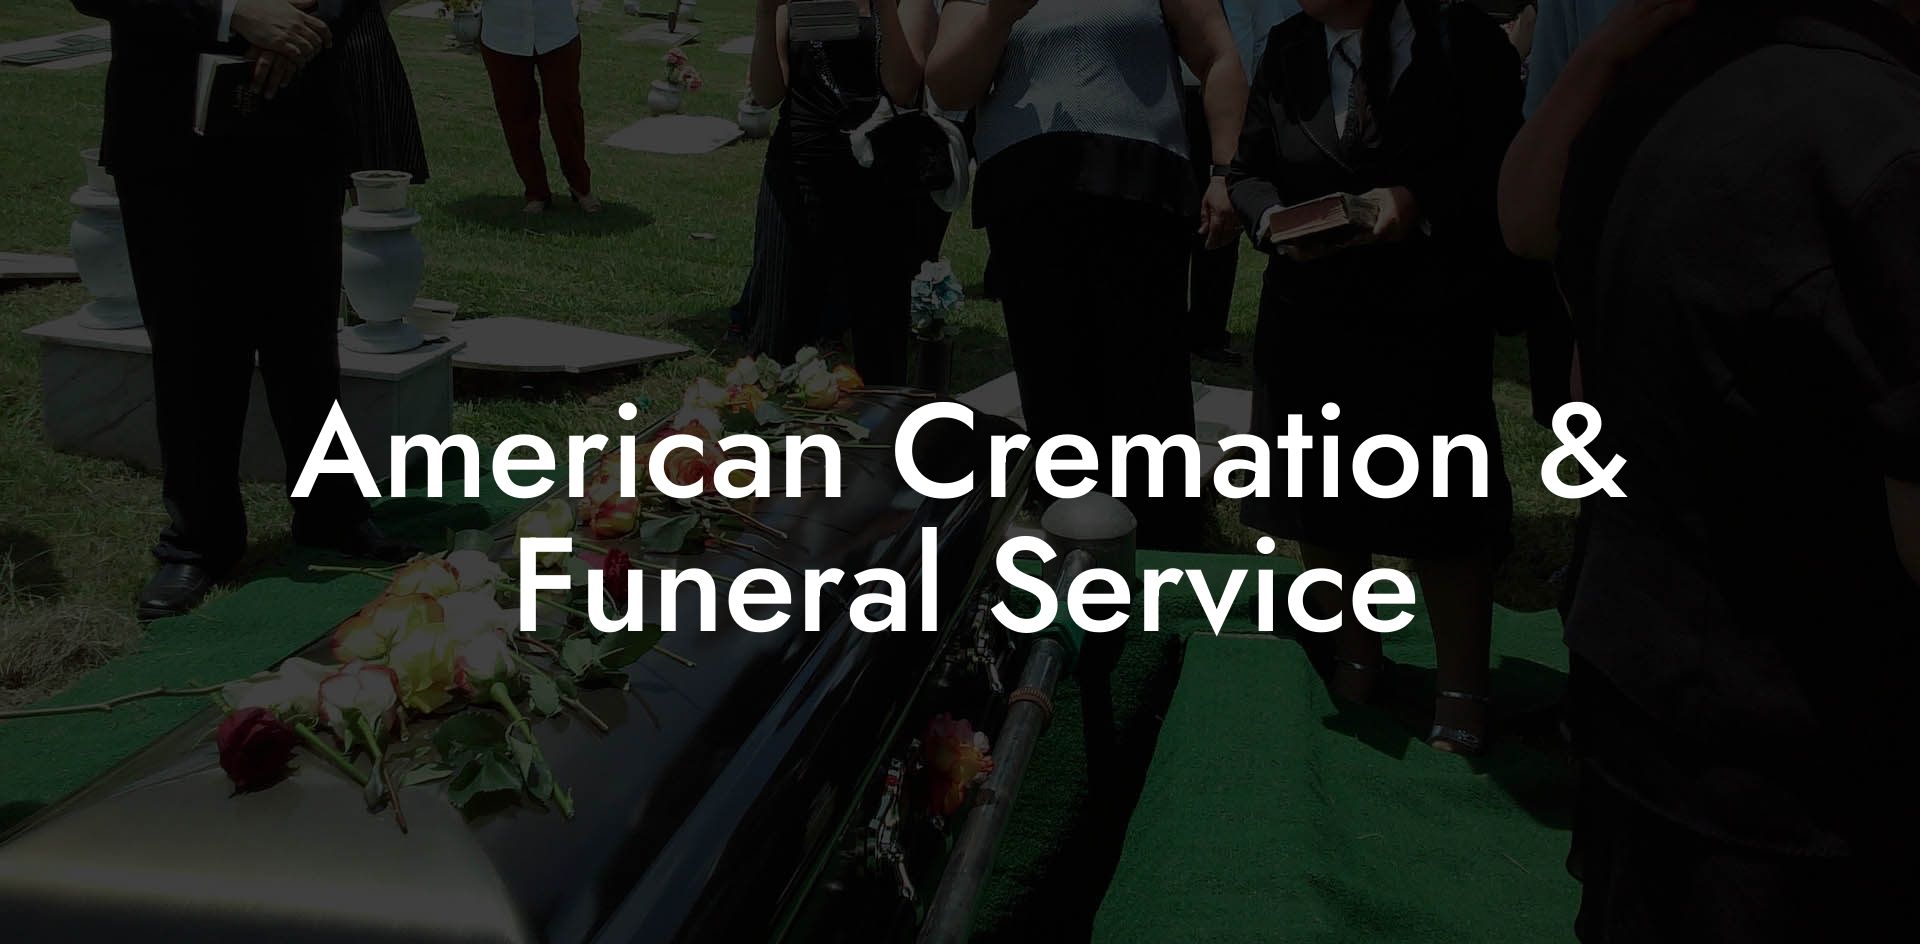 American Cremation & Funeral Service